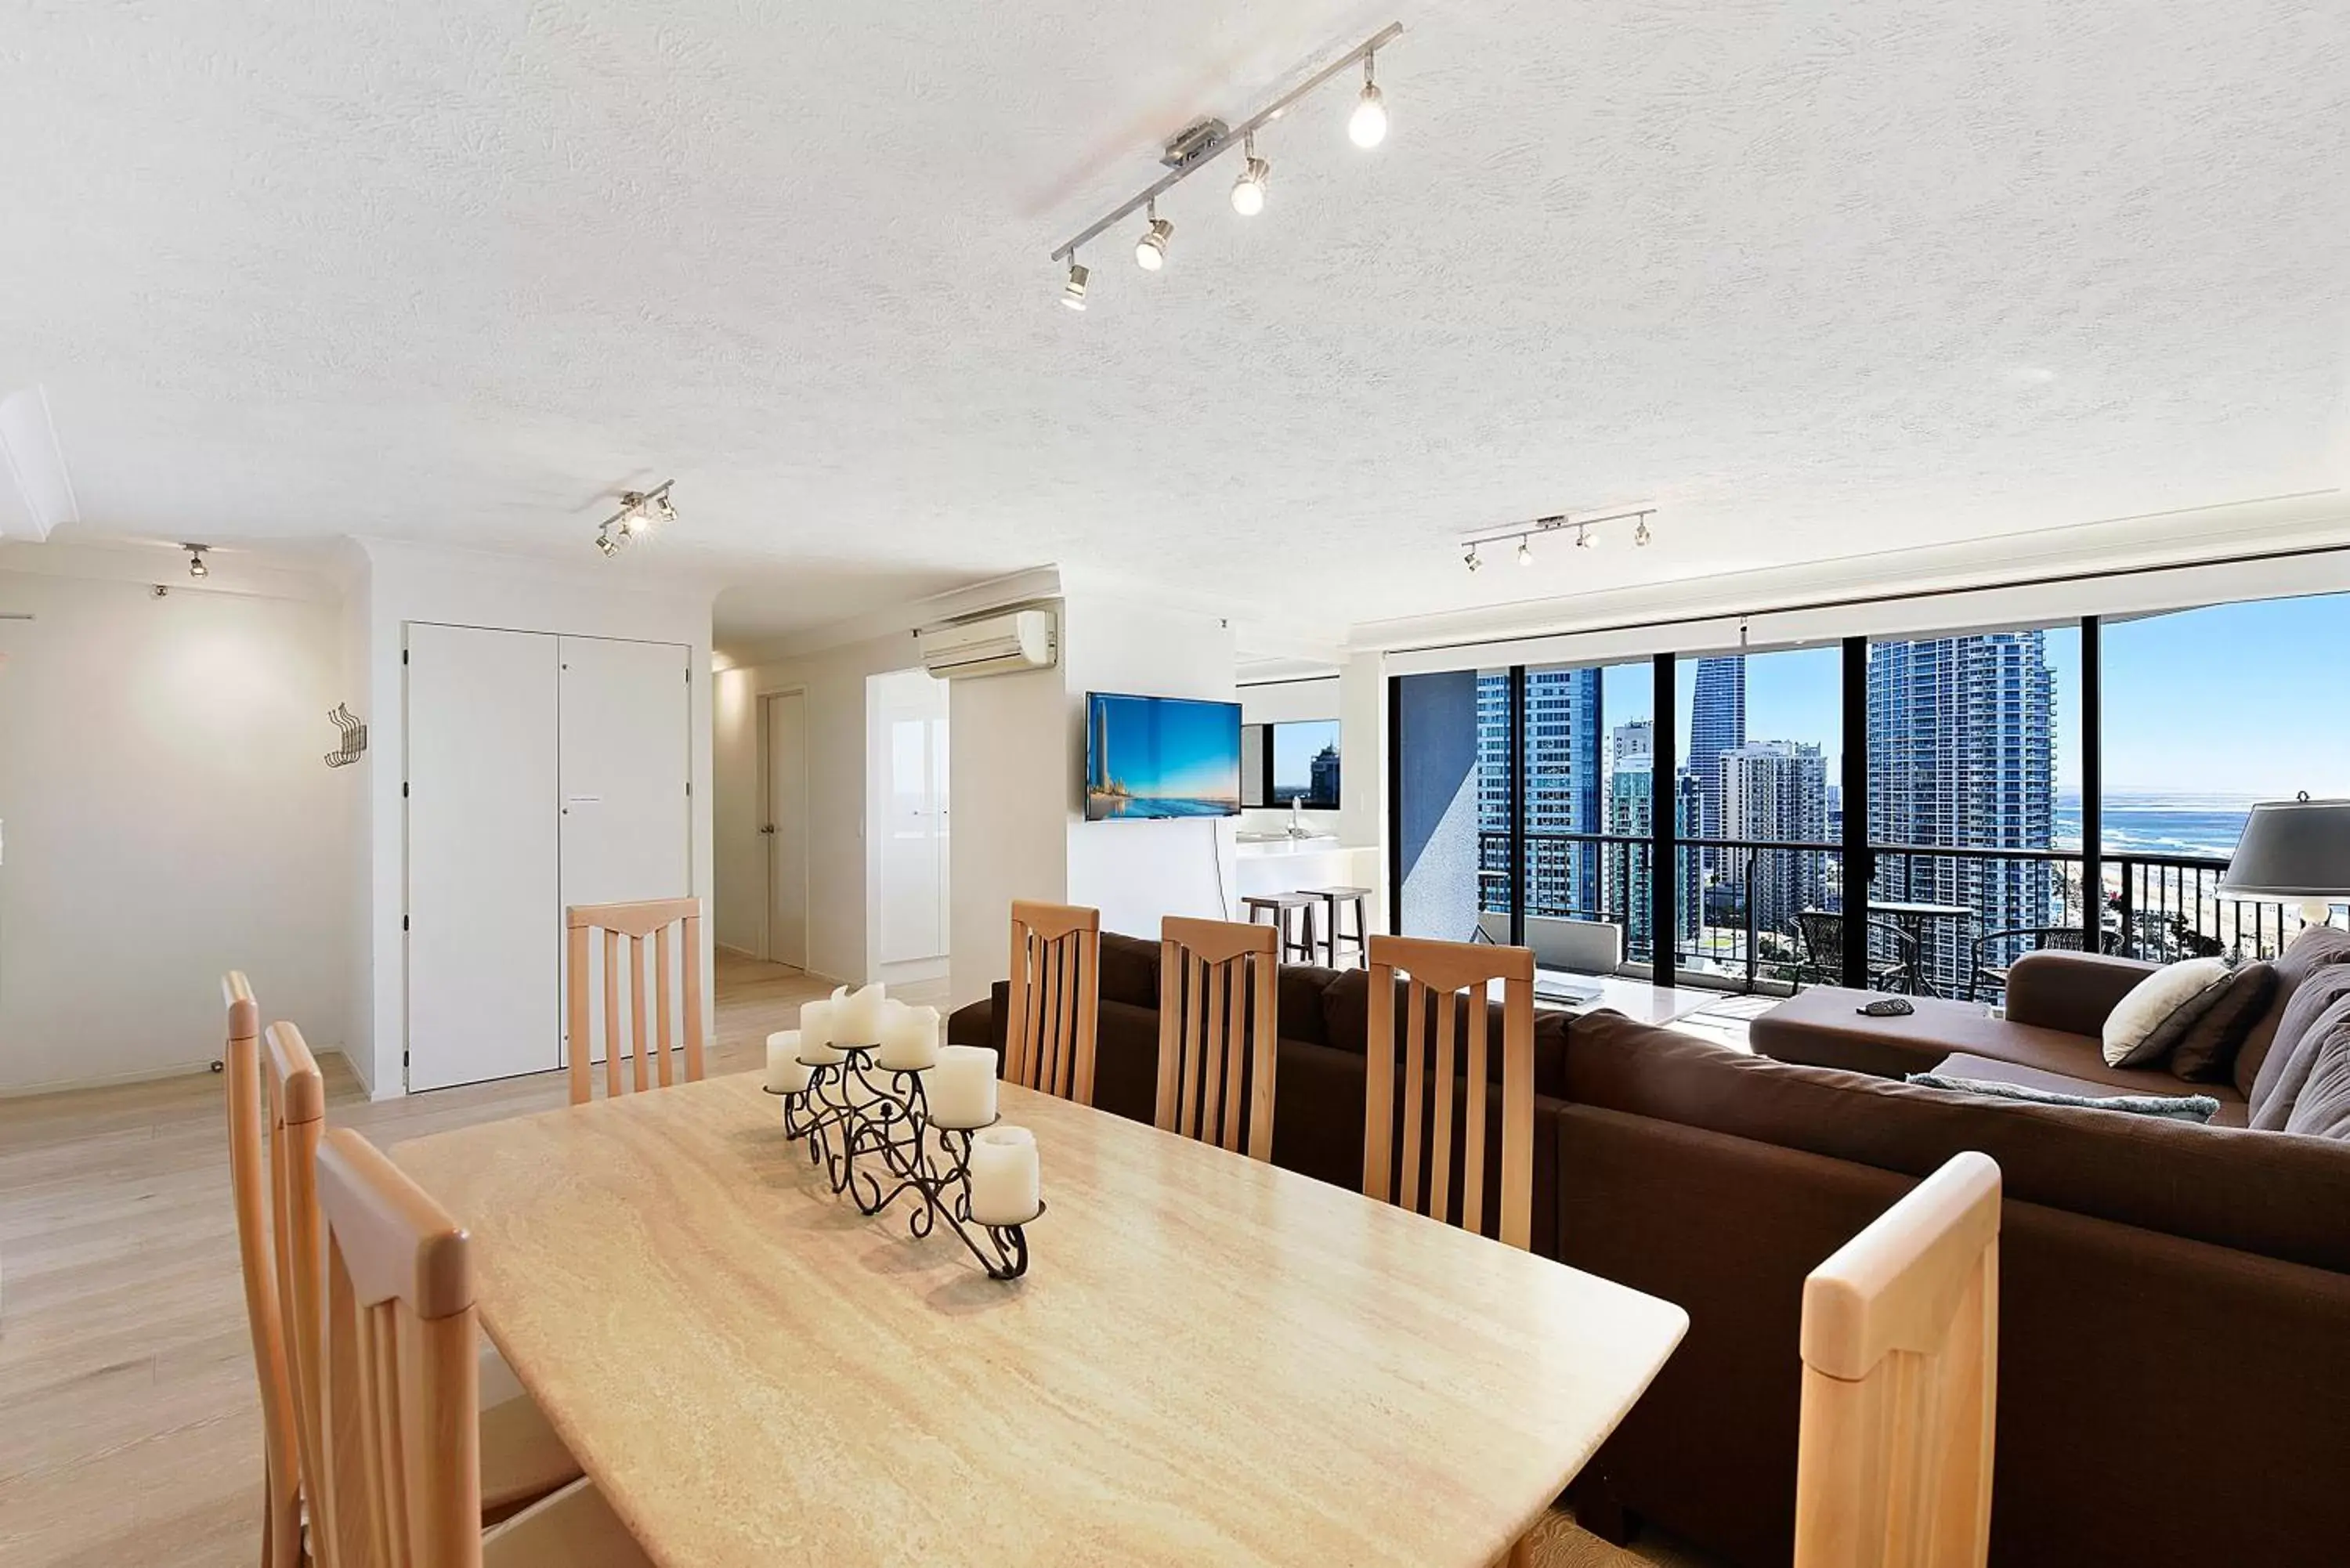 Dining Area in Surfers Century Oceanside Apartments